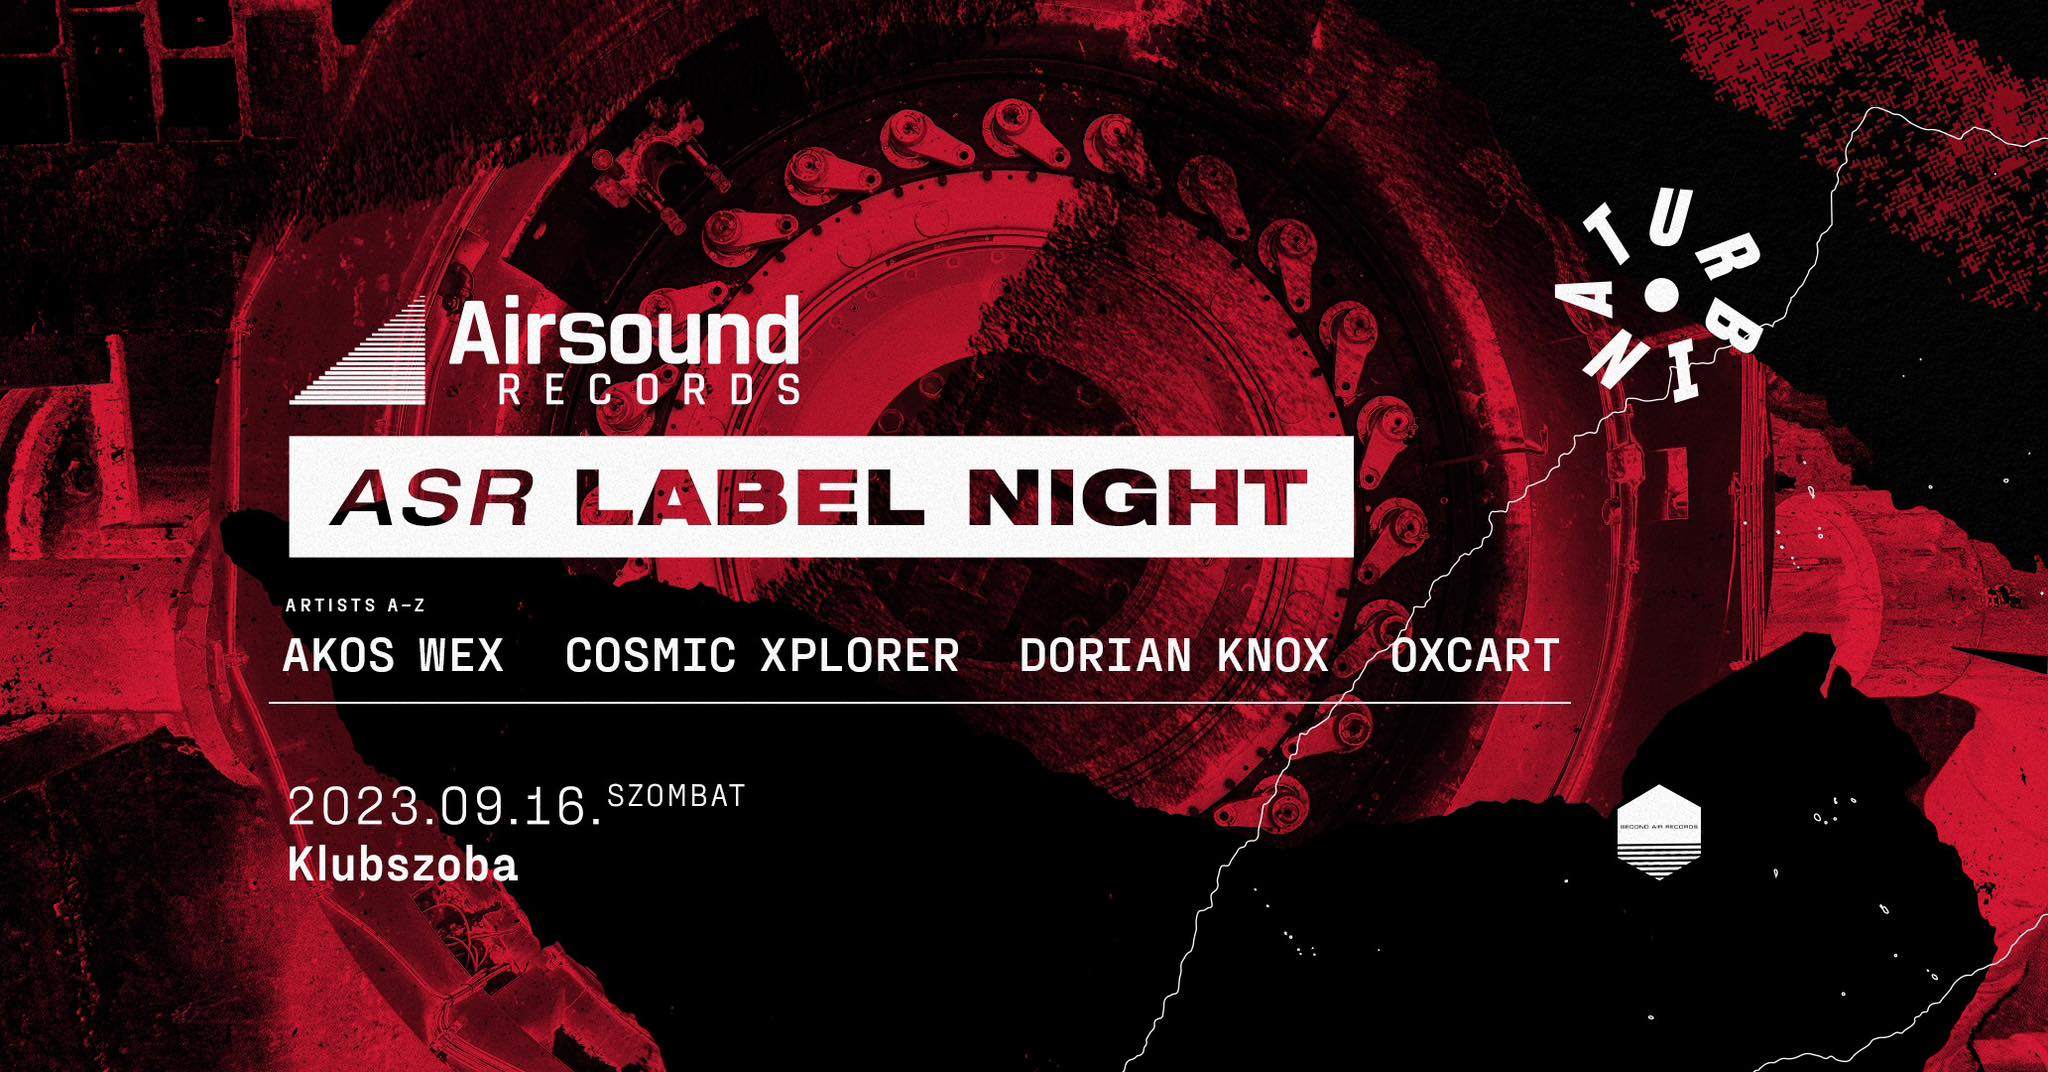 AIRSOUND RECORDS Label Night with Akos Wex, Cosmic Xplorer, Dorian Knox, Oxcart - Página frontal